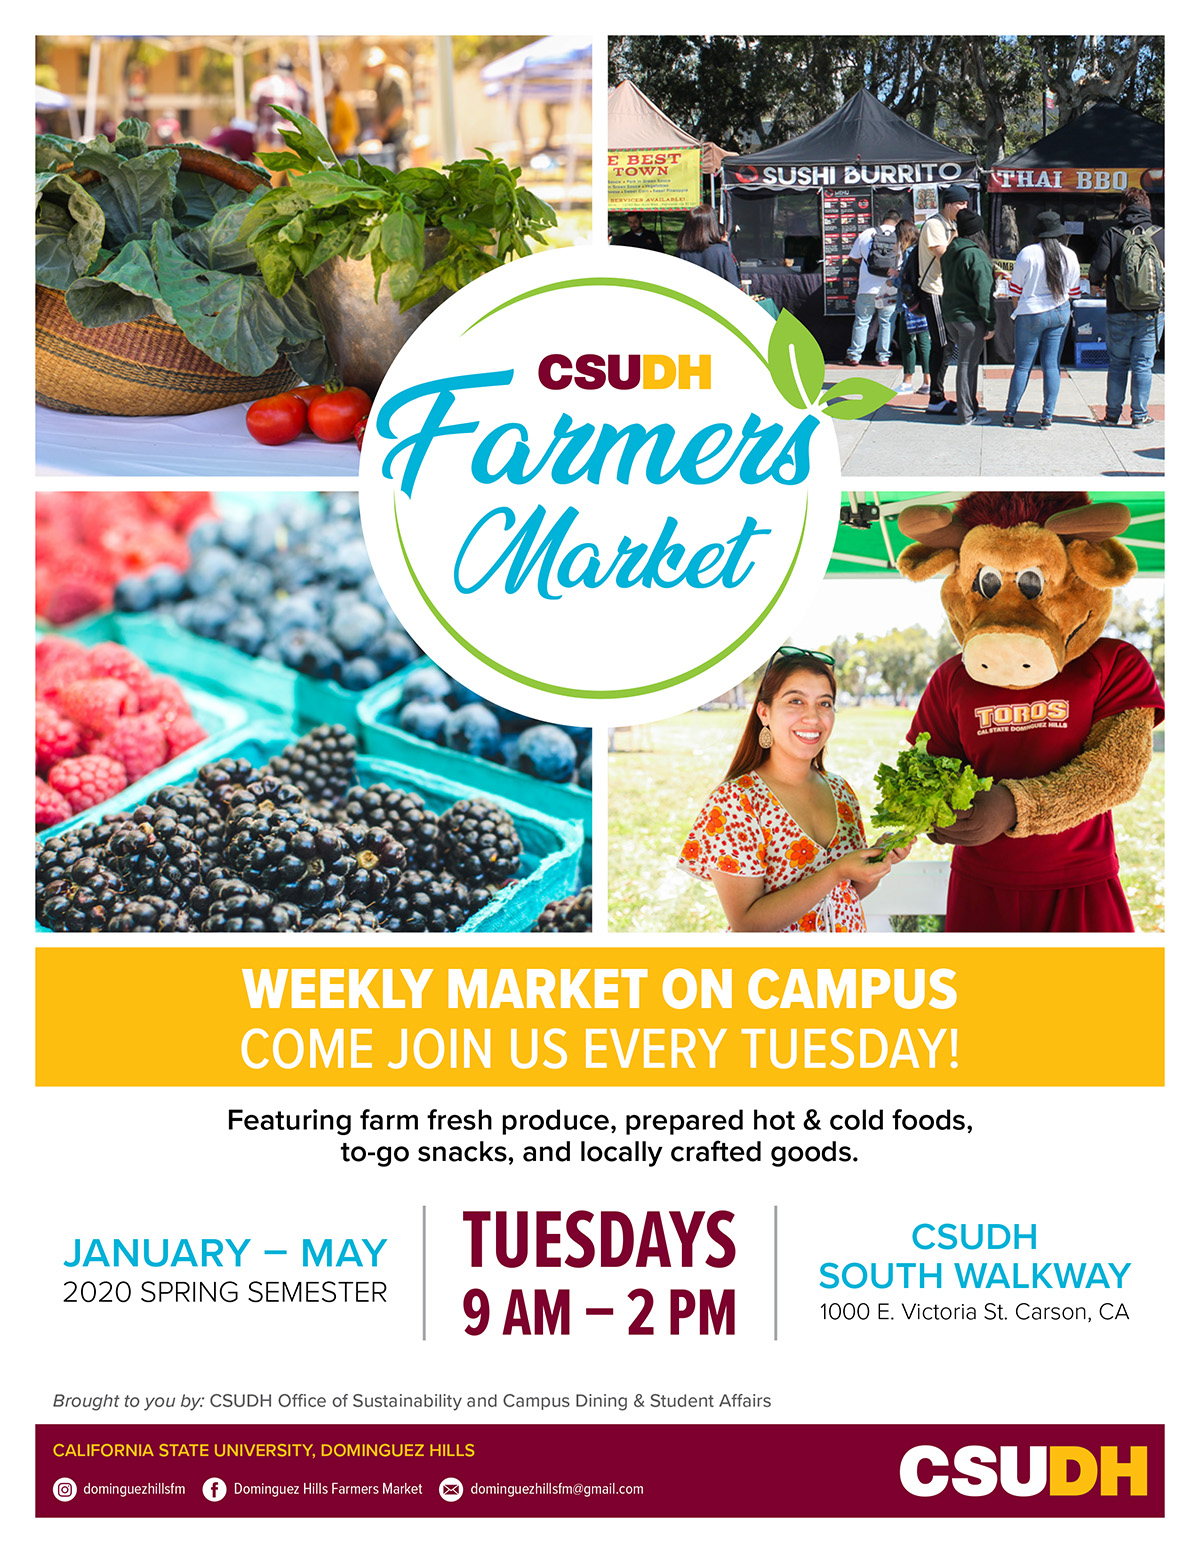 Dollar Tree Farmers Market Calendar 2021 News and Events Browse and